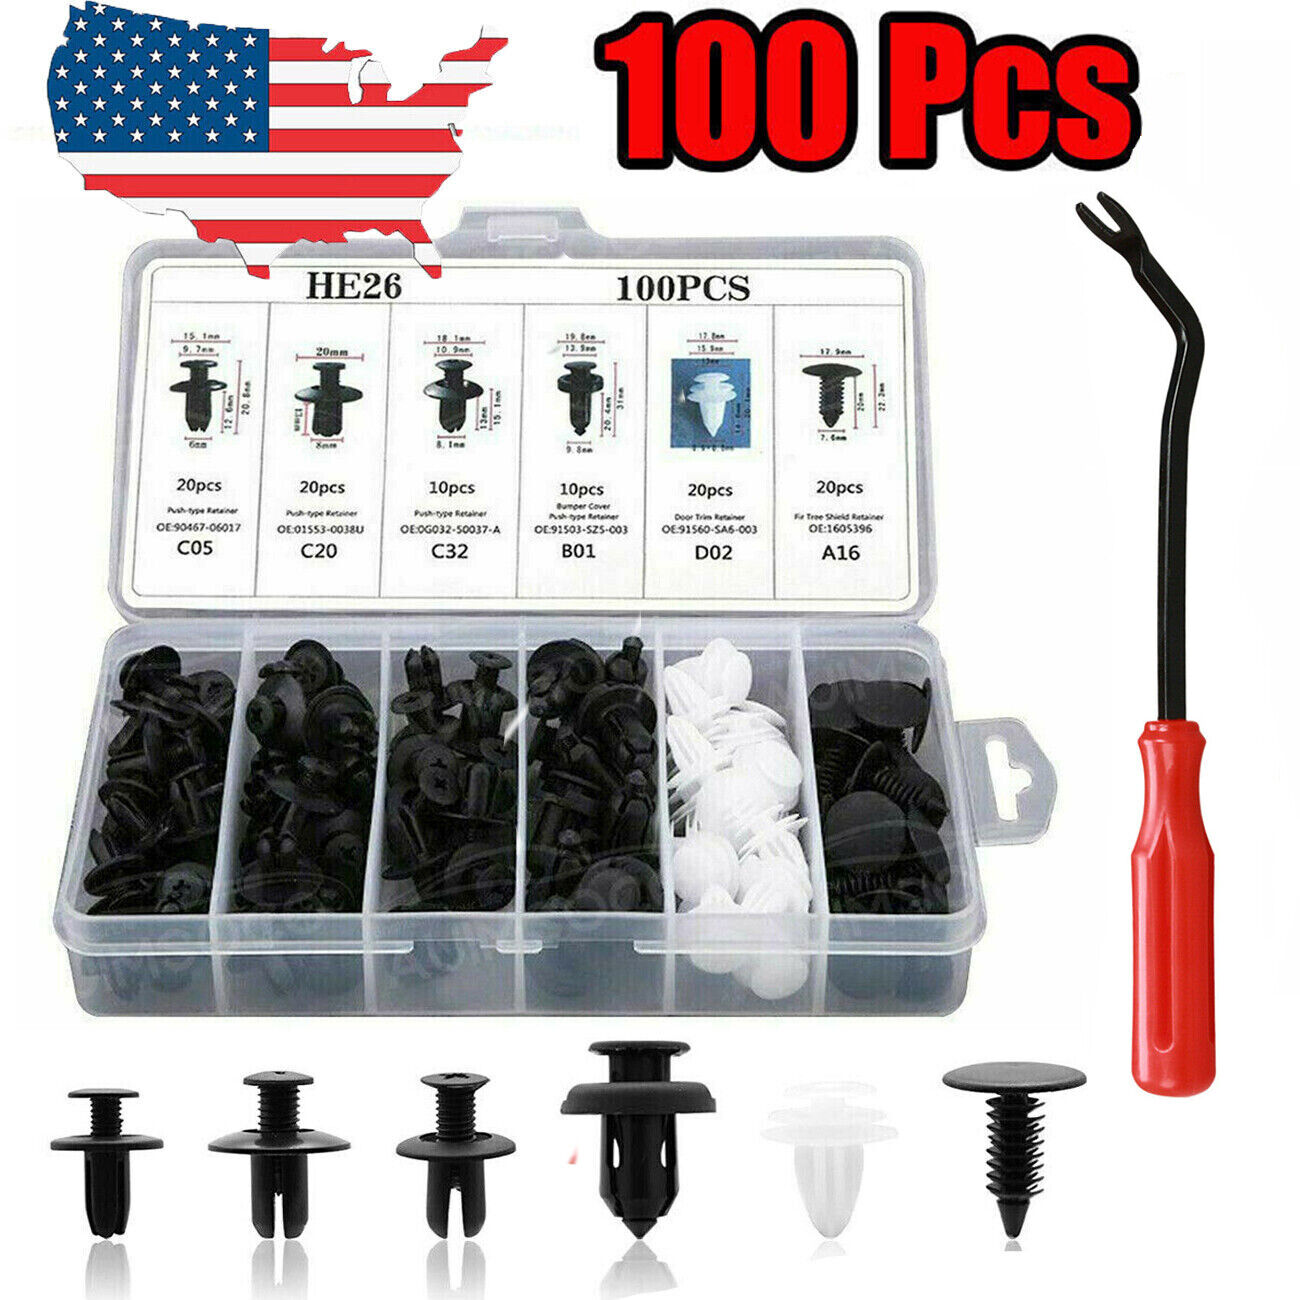 100PCS Box Set Bumper Fender Liner Push Type Retainer Clips for Nissan w/Tool US